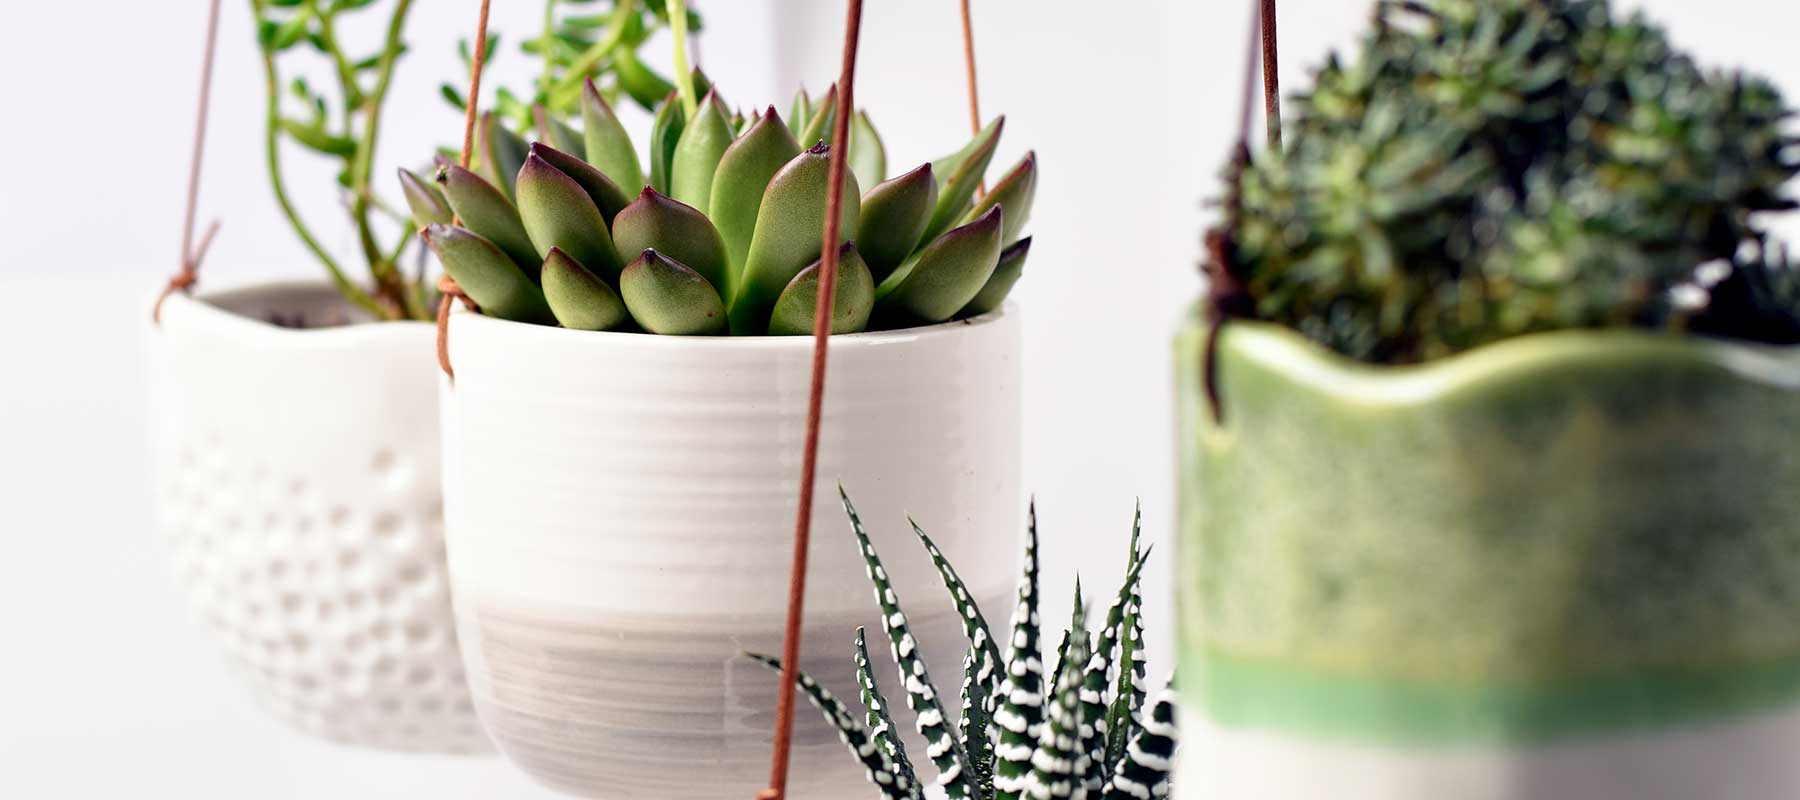 STYLING / 3 Perfect Hanging Plant and Pot Combos For Eye Level Greenery